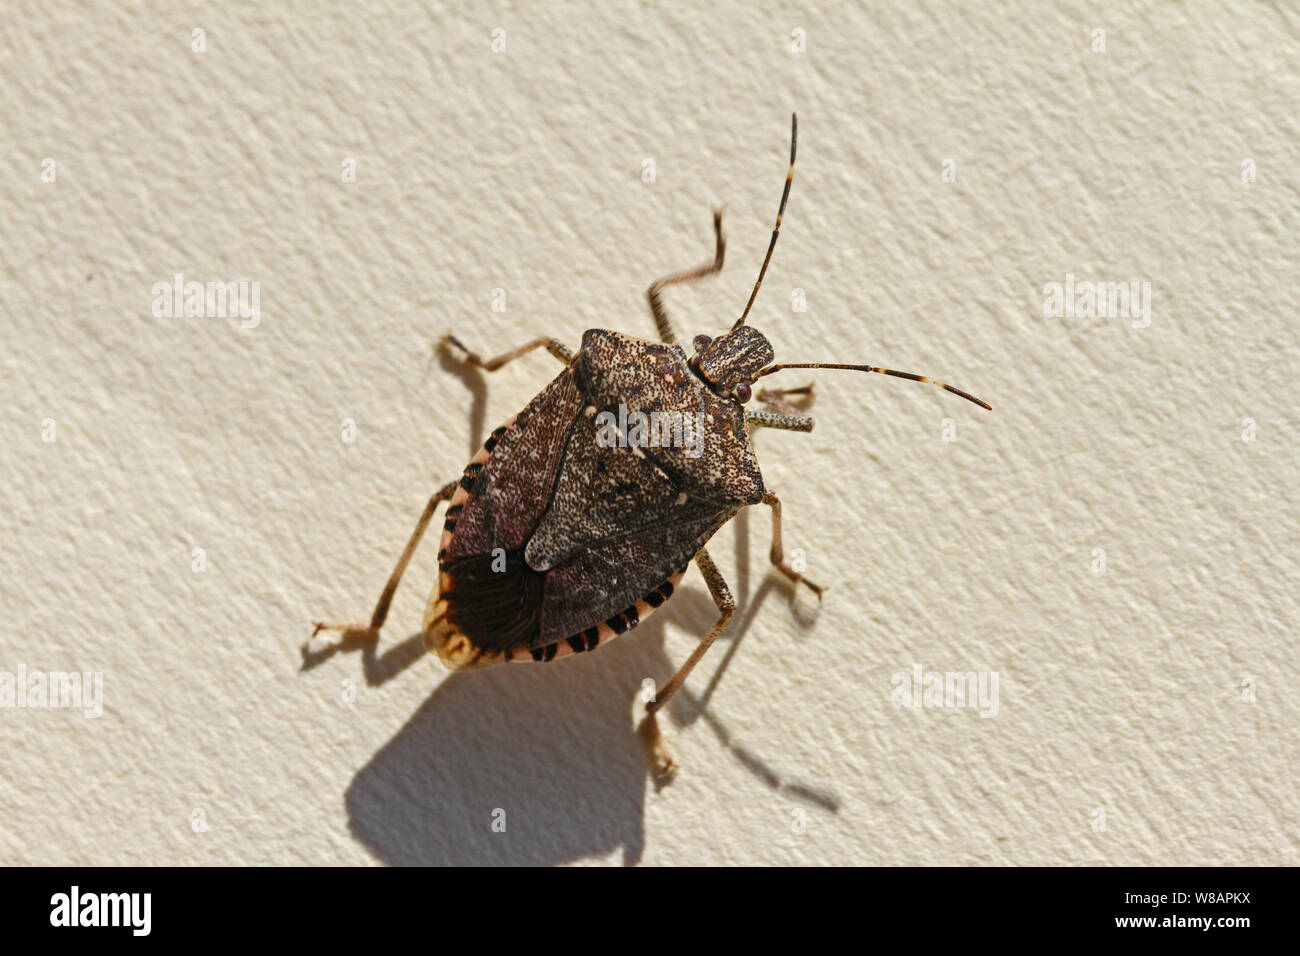 brown marmorated stink bug or shield bug Latin halyomorpha halys from the pentatomidae family native to China and Asia a serious pest in Italy and USA Stock Photo